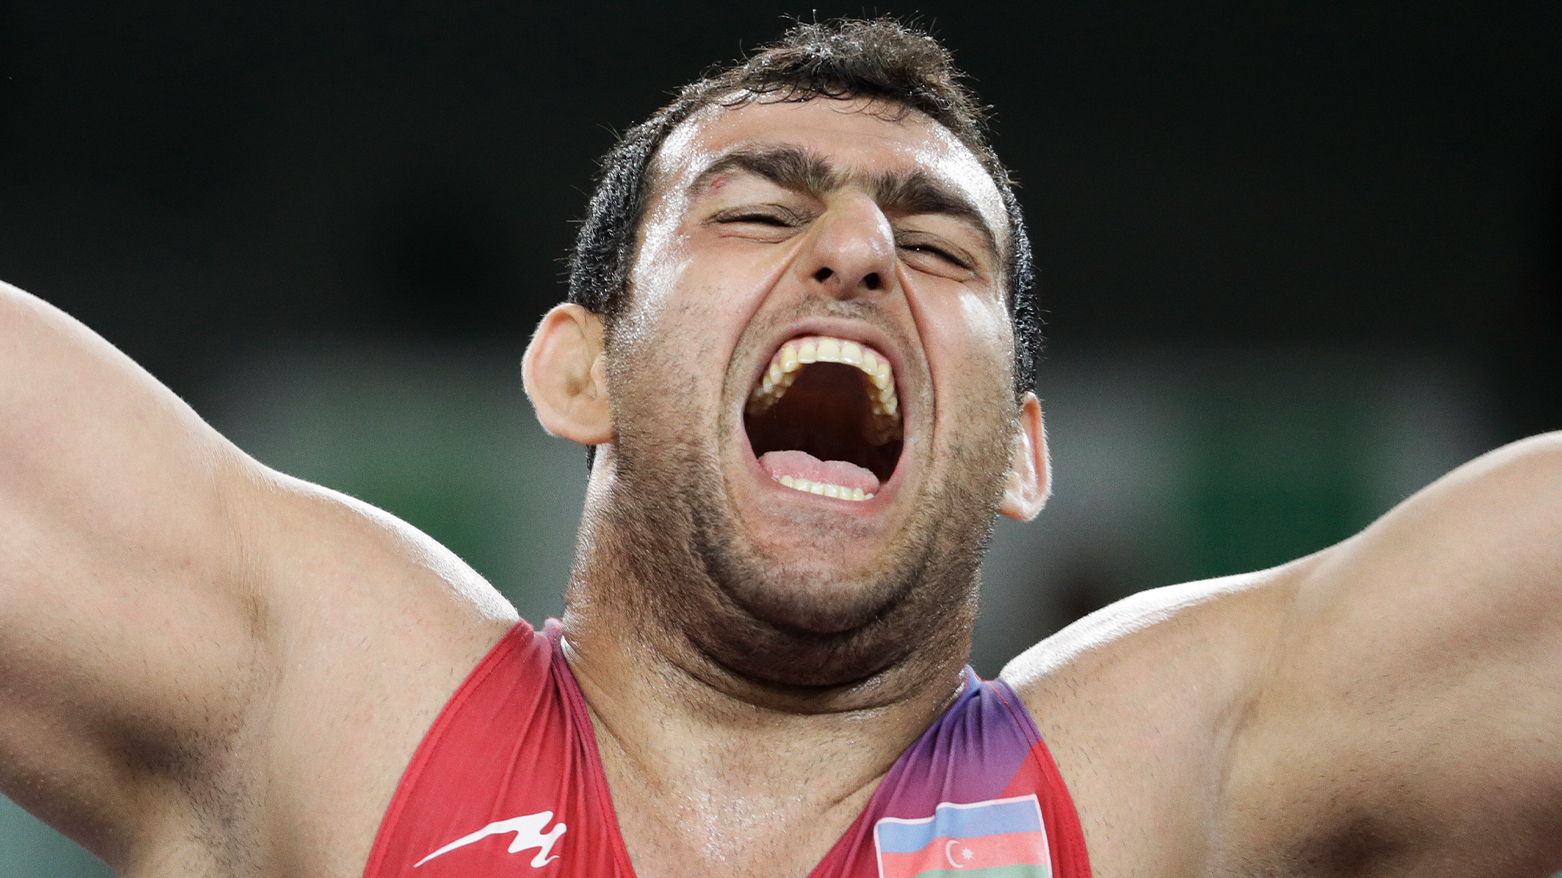 Azerbaijan's Sabah Shariati celebrates after winning the bronze medal during the men's wrestling Greco-Roman 130-kg competition. (Photo: AP)